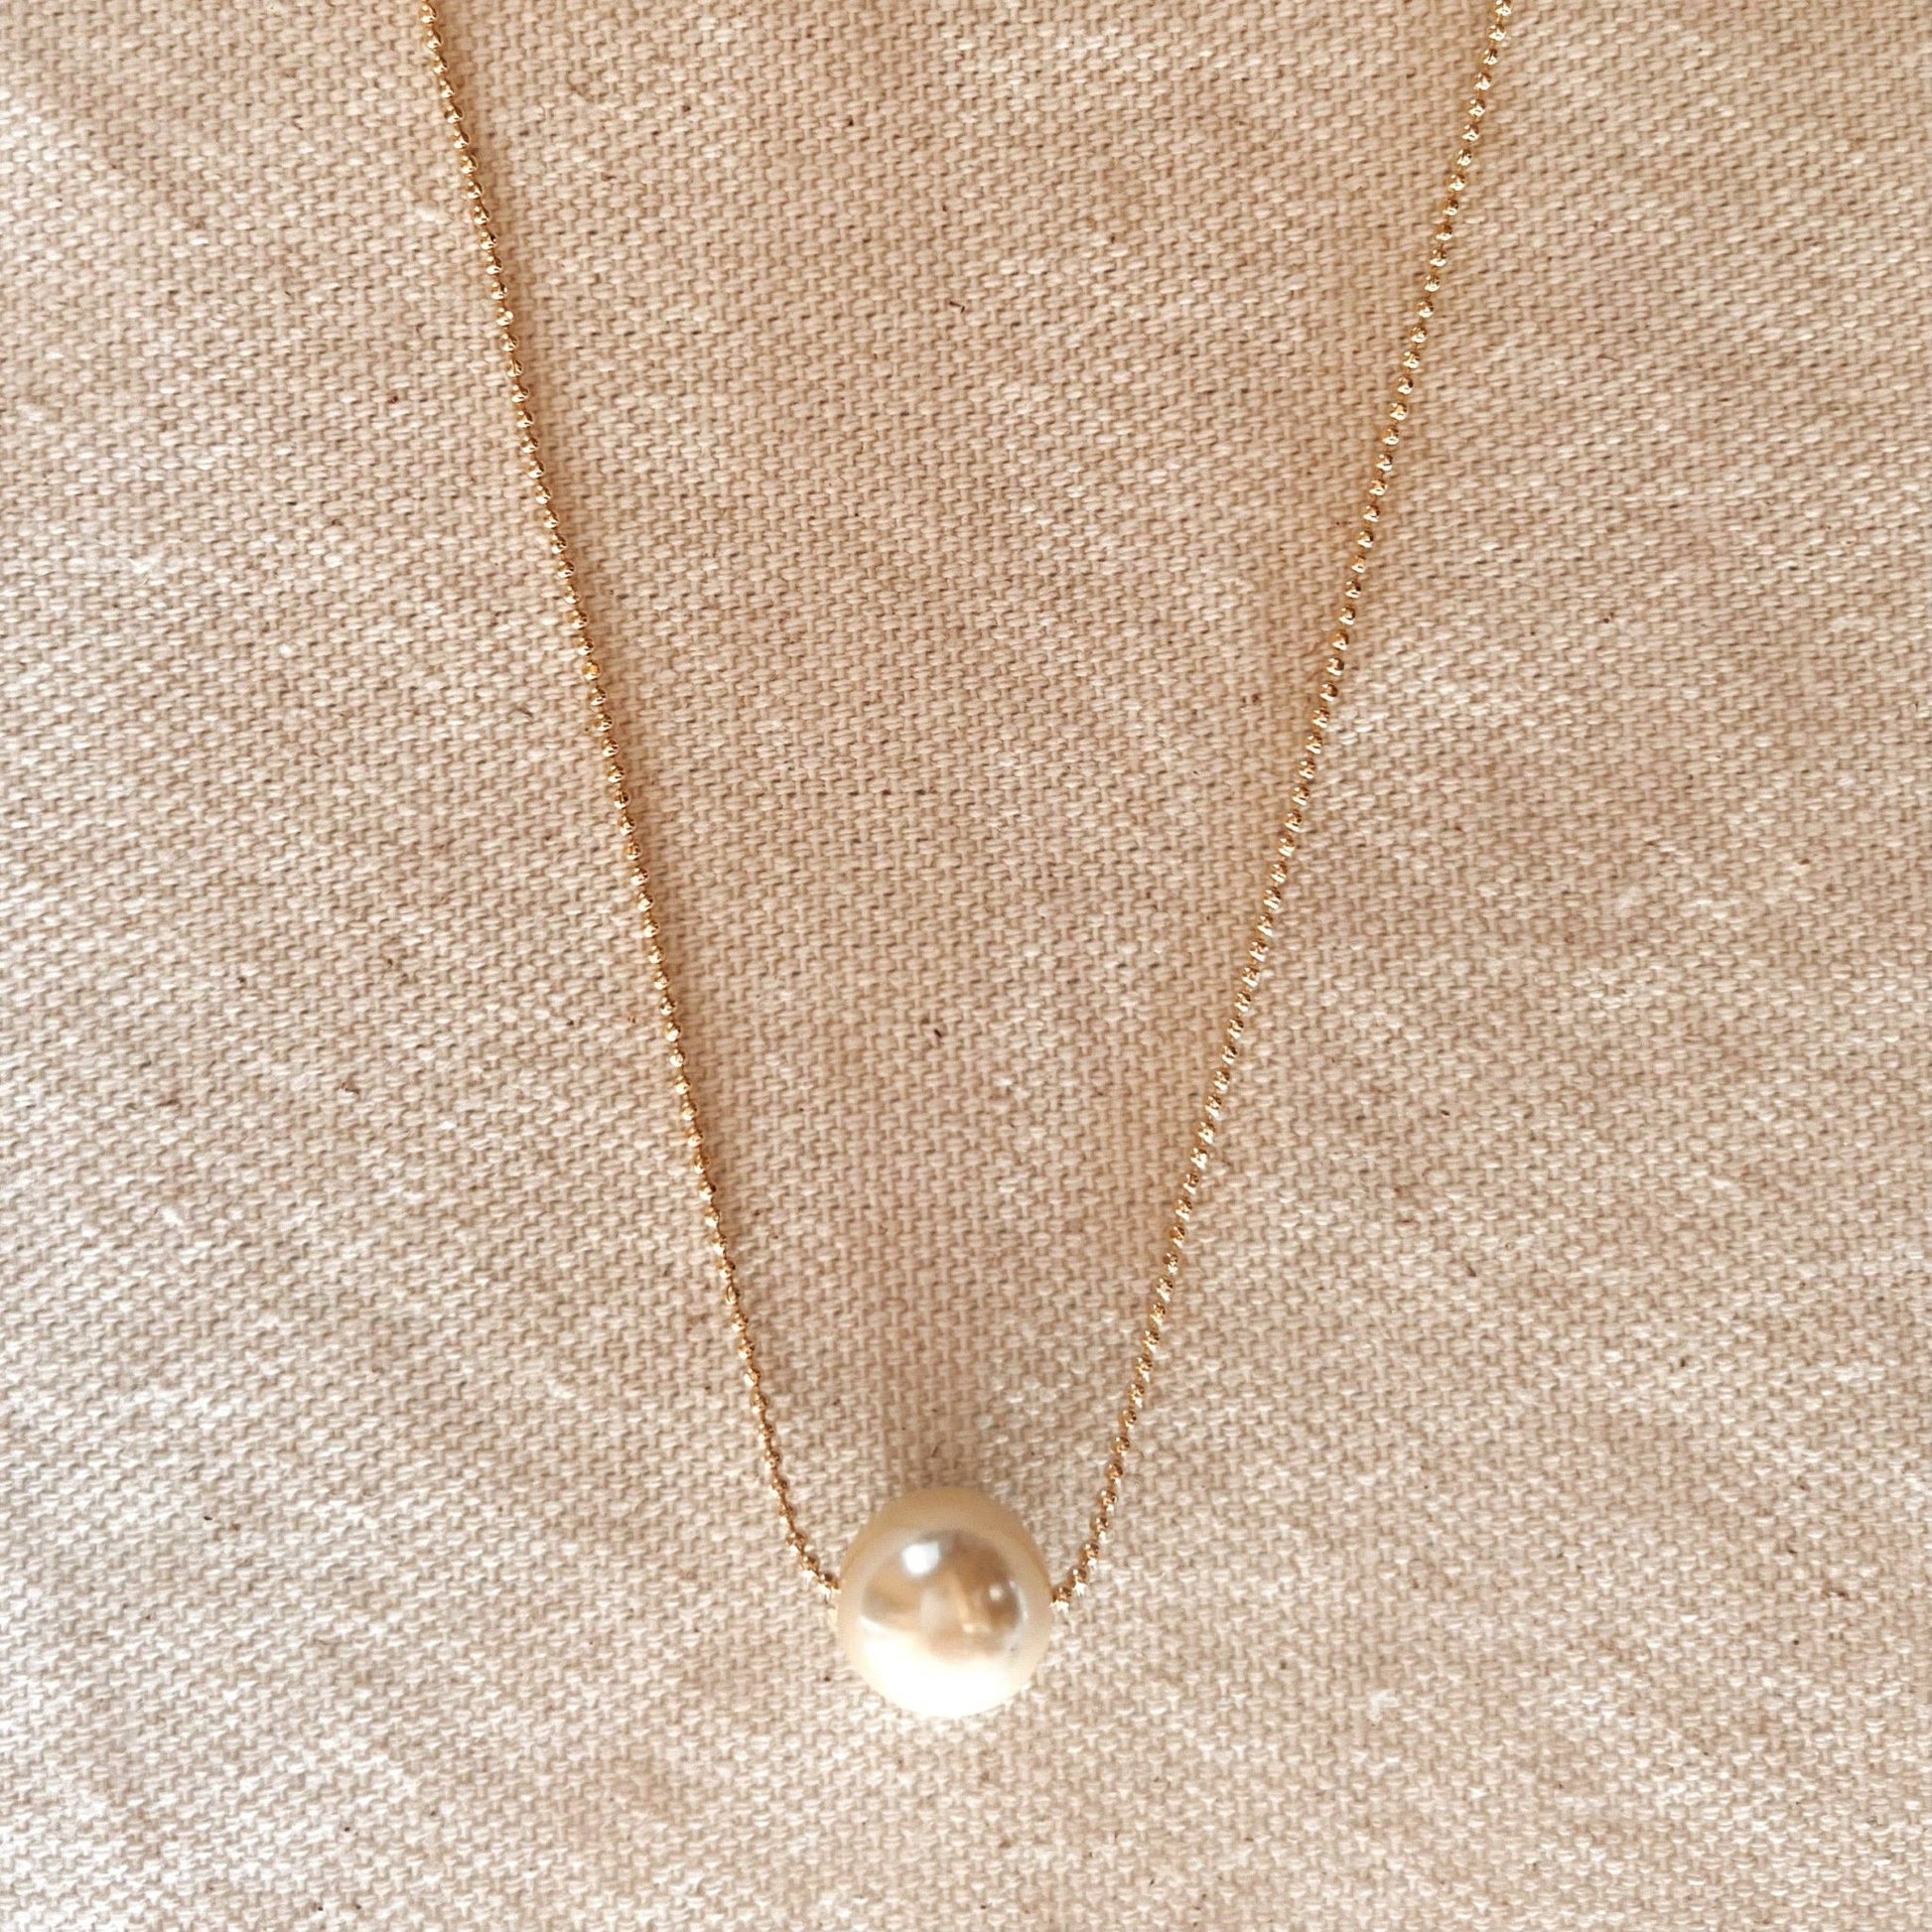 18k Gold Filled Solitaire Pearl Necklace - FOREVERLINKX